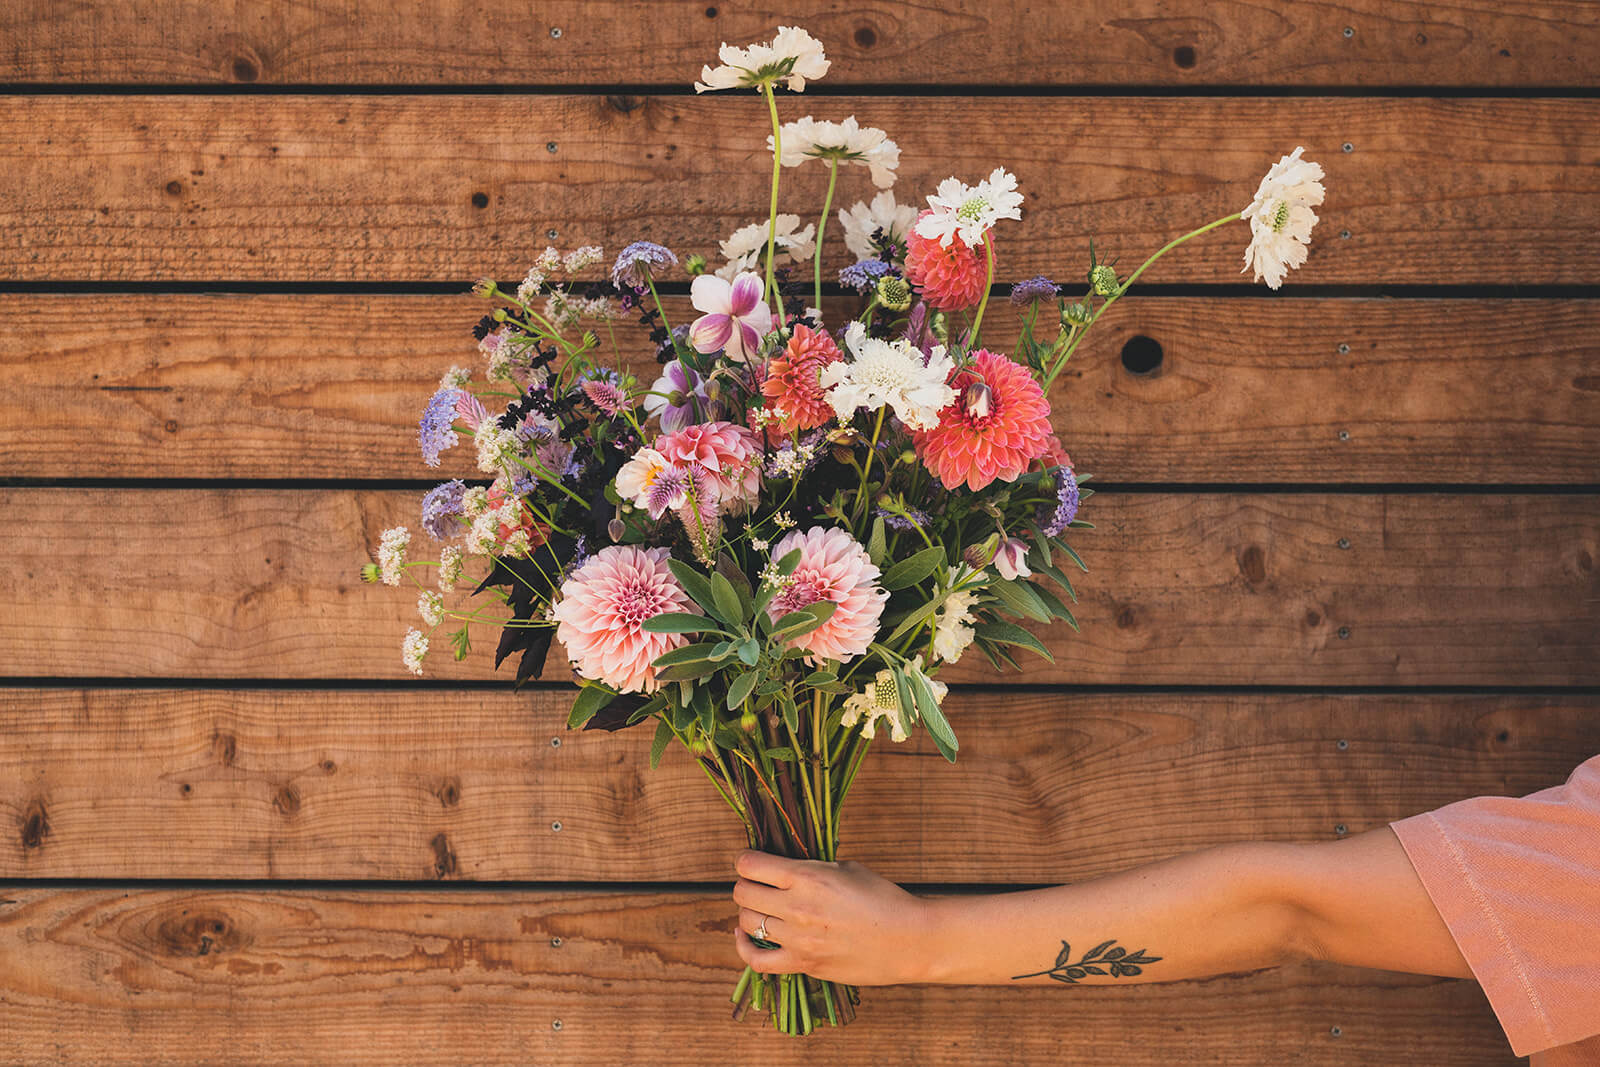 hand stretched out holding a bouquet of flowers in front of a wood door